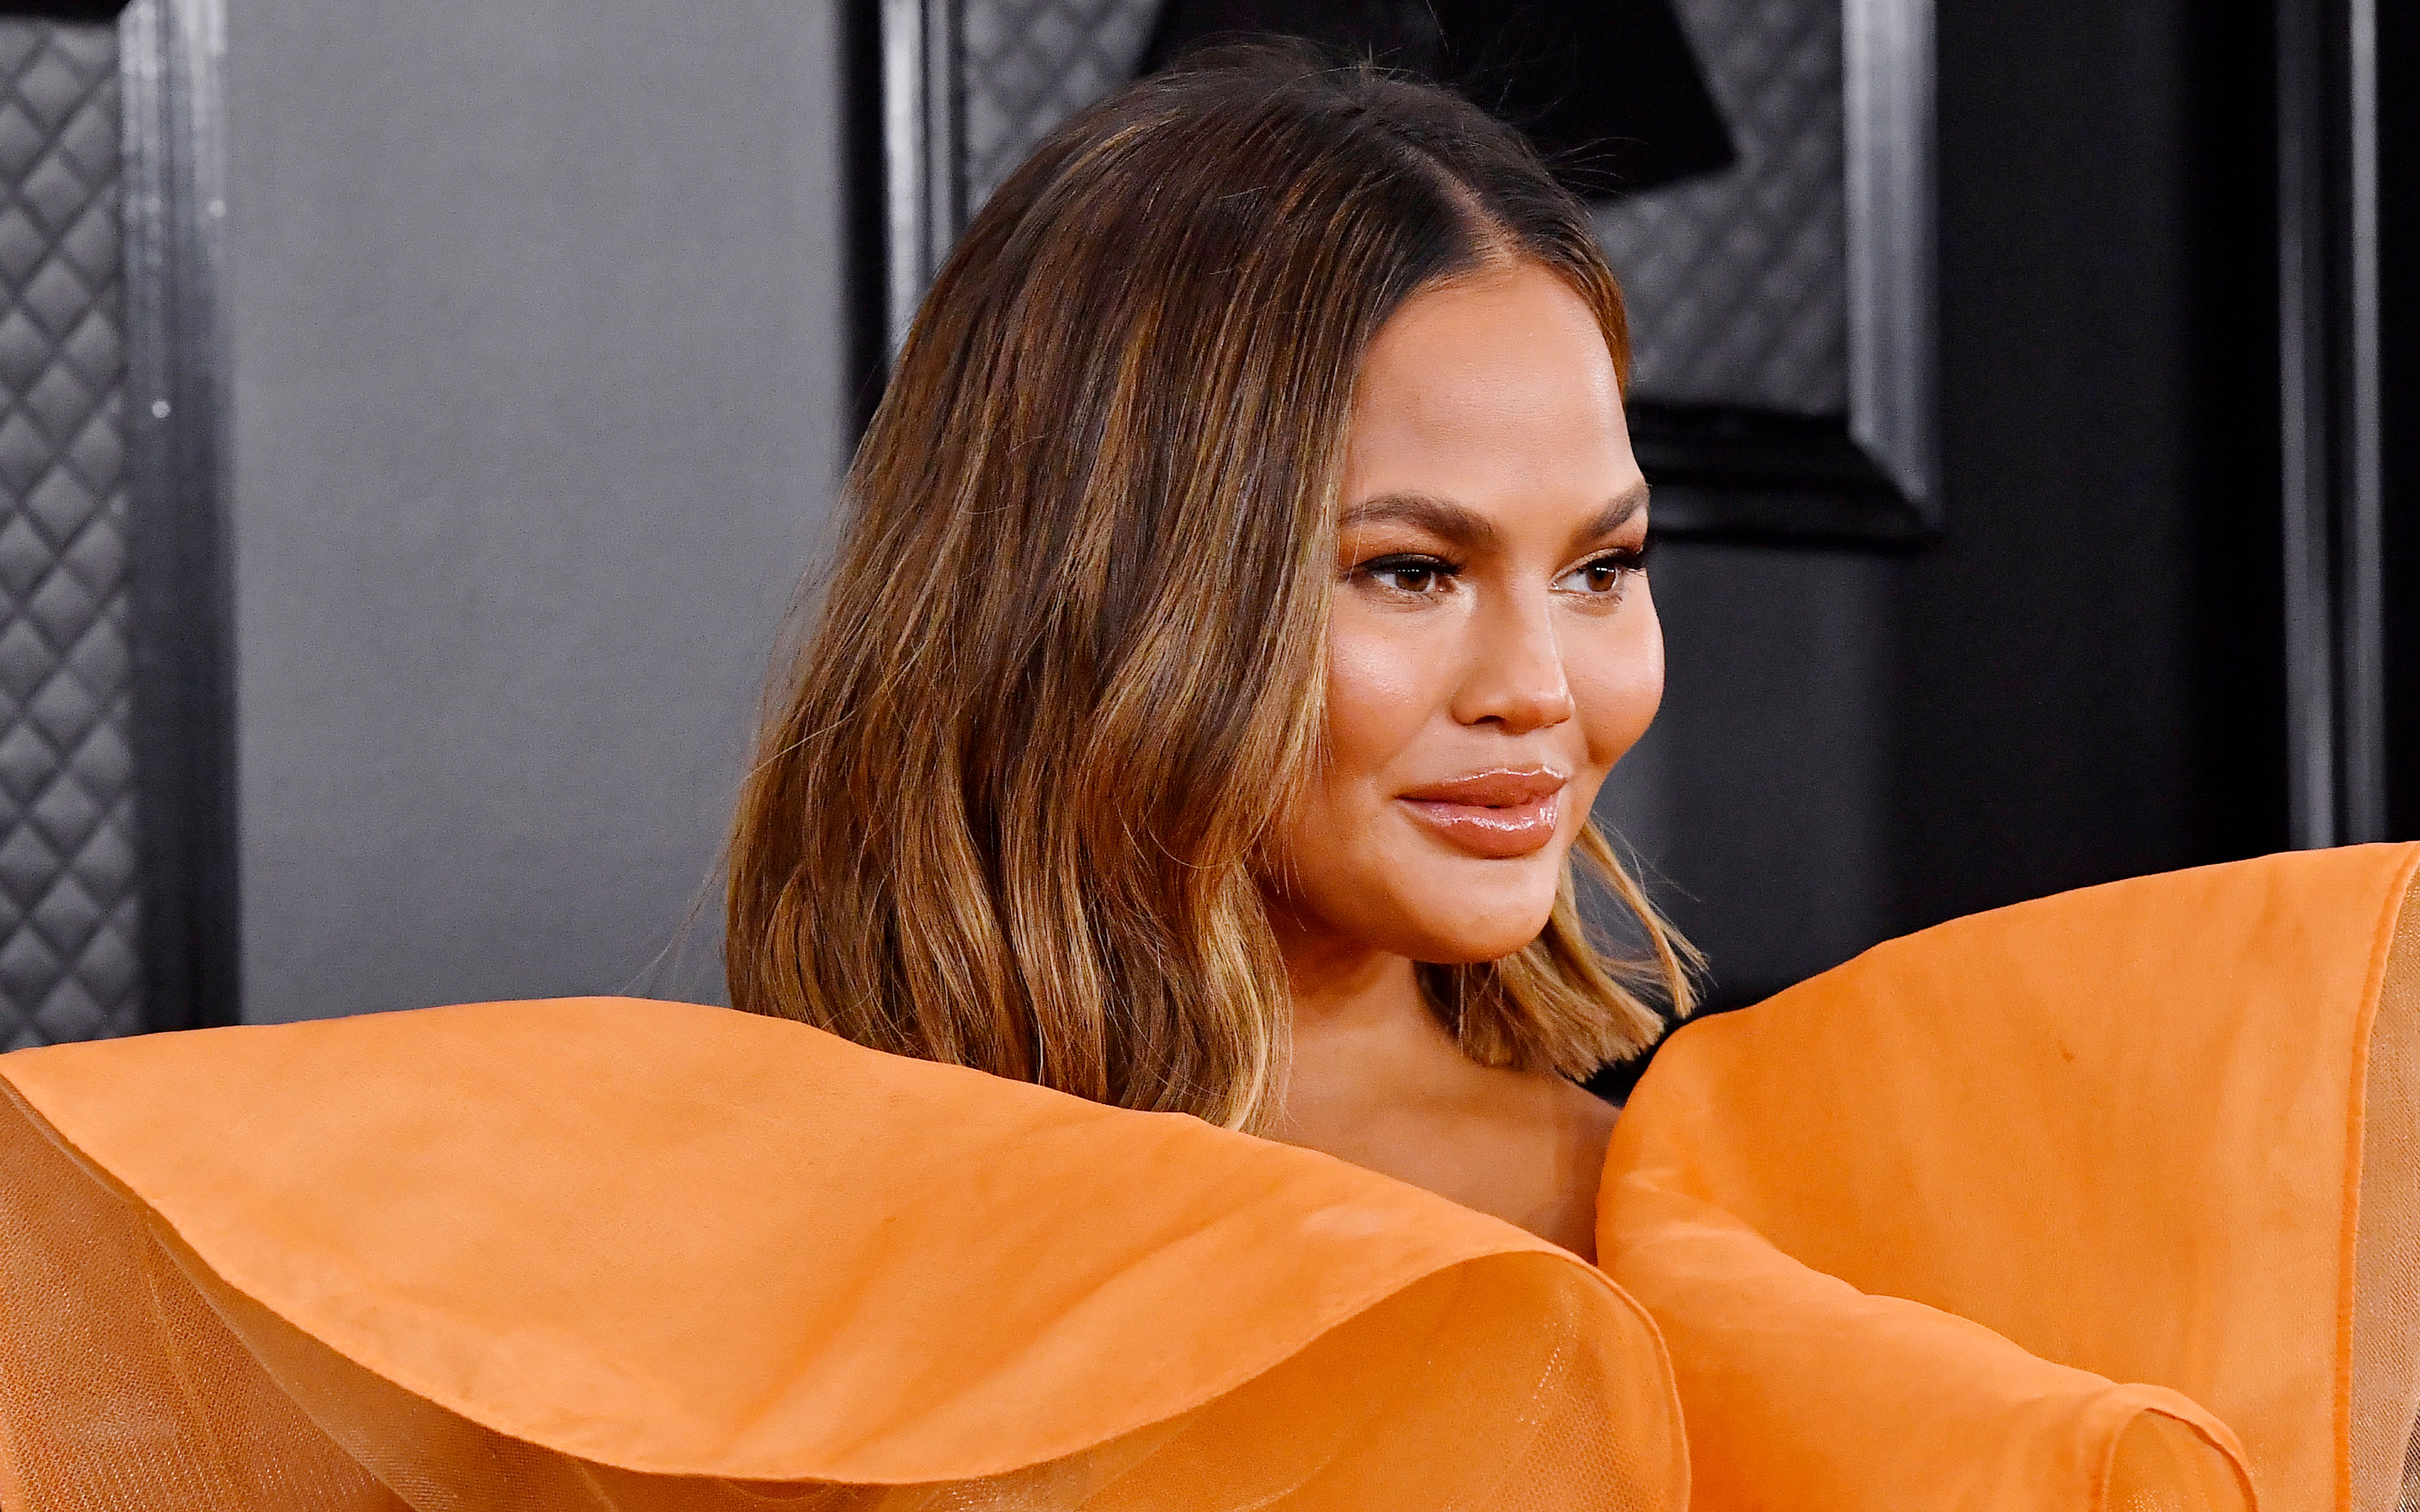 Chrissy Teigen Apologizes Amid Bullying Controversy: “I Was a Troll, Full Stop”